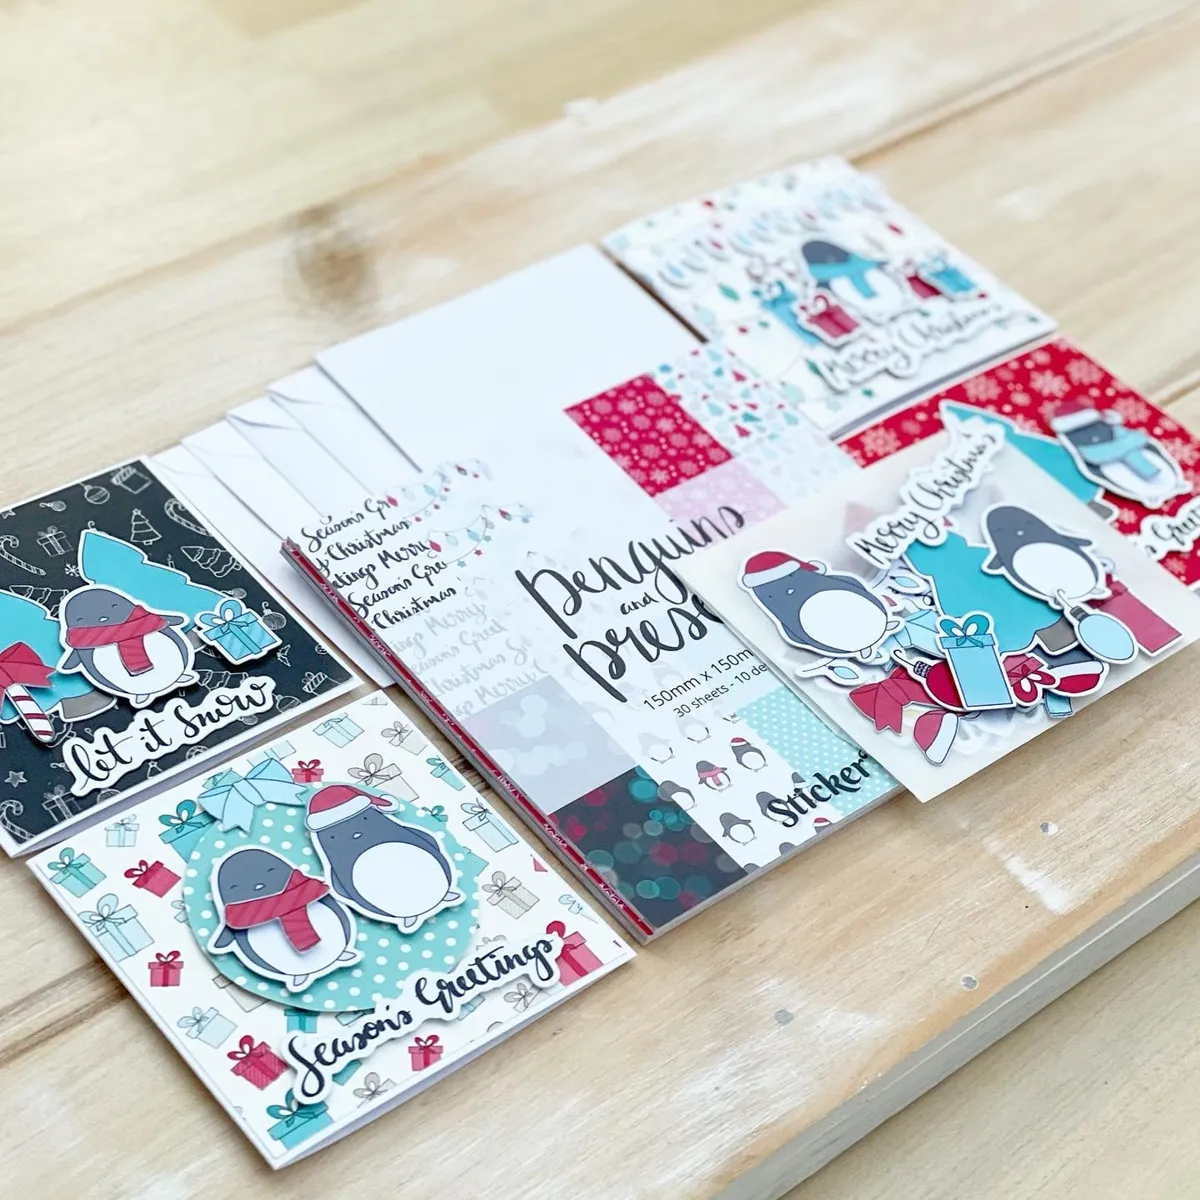 the Christmas card making kit comes with a riot of adorable penguin artwork for you to craft with